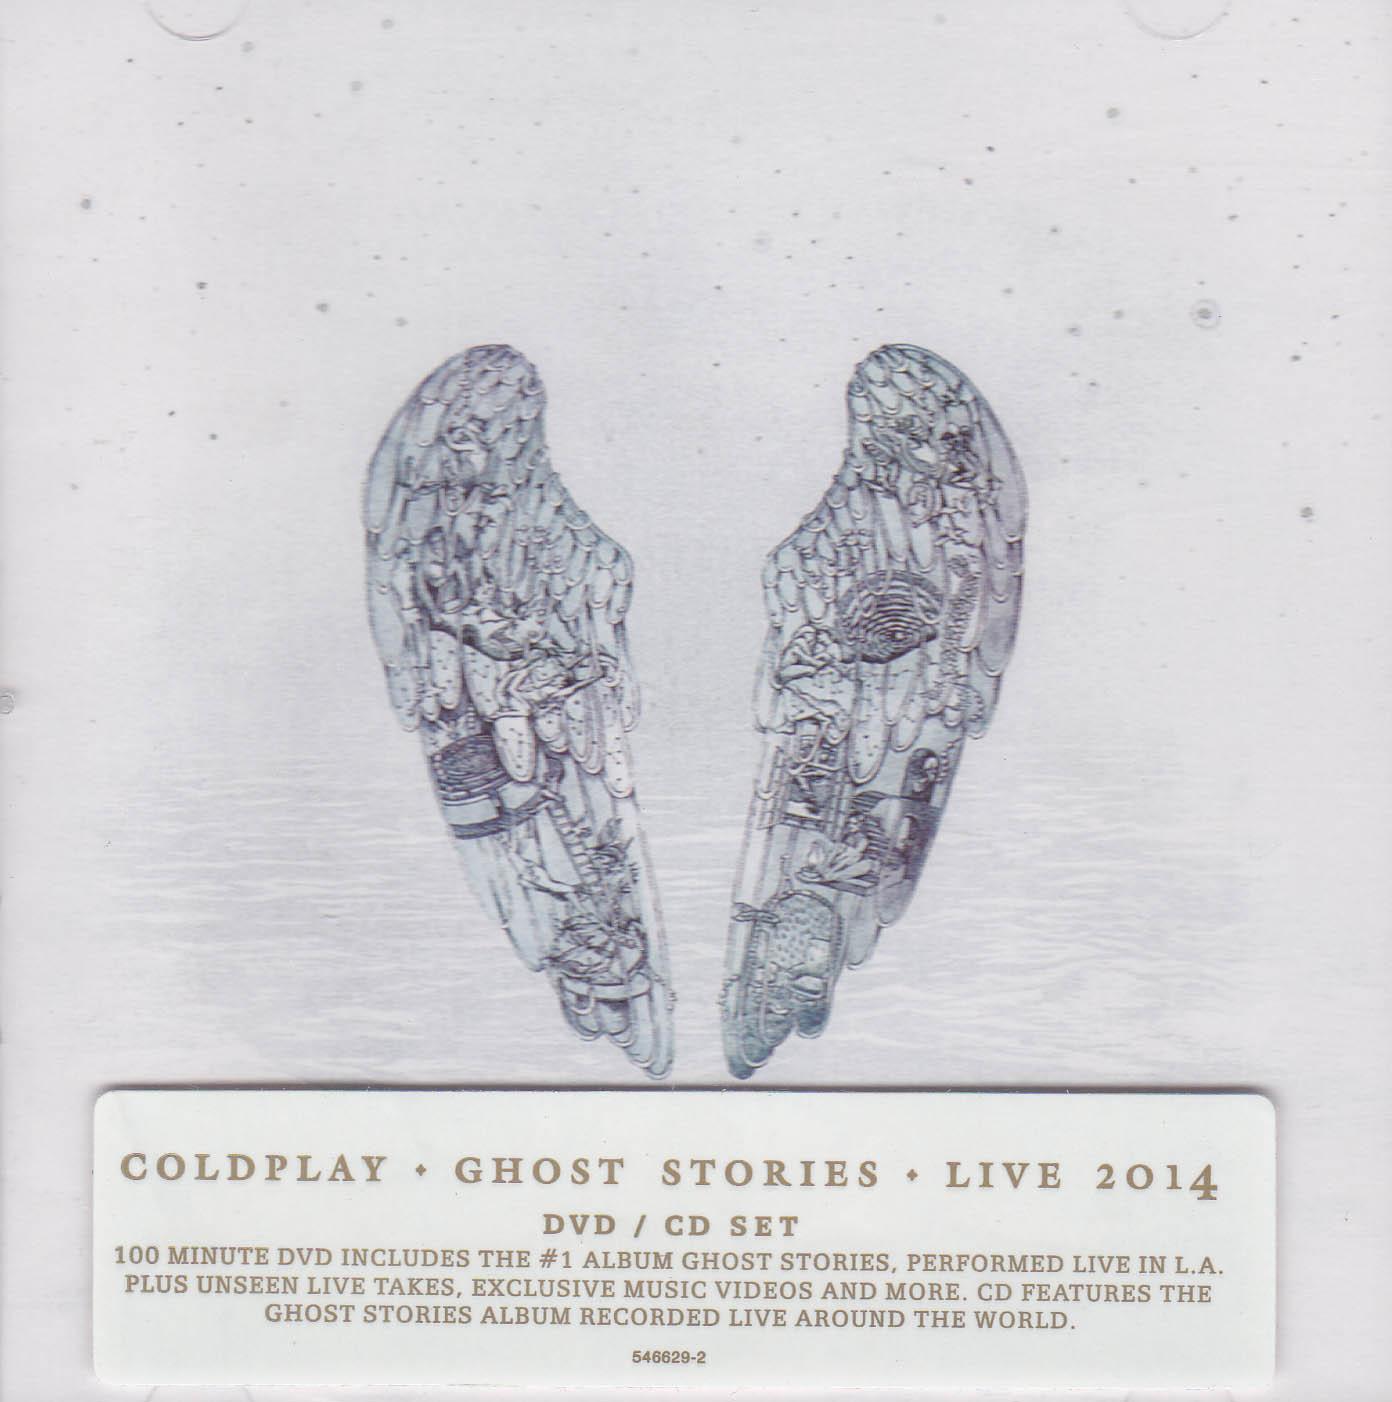 Coldplay Ghost Stories Live 2014 DVD CD